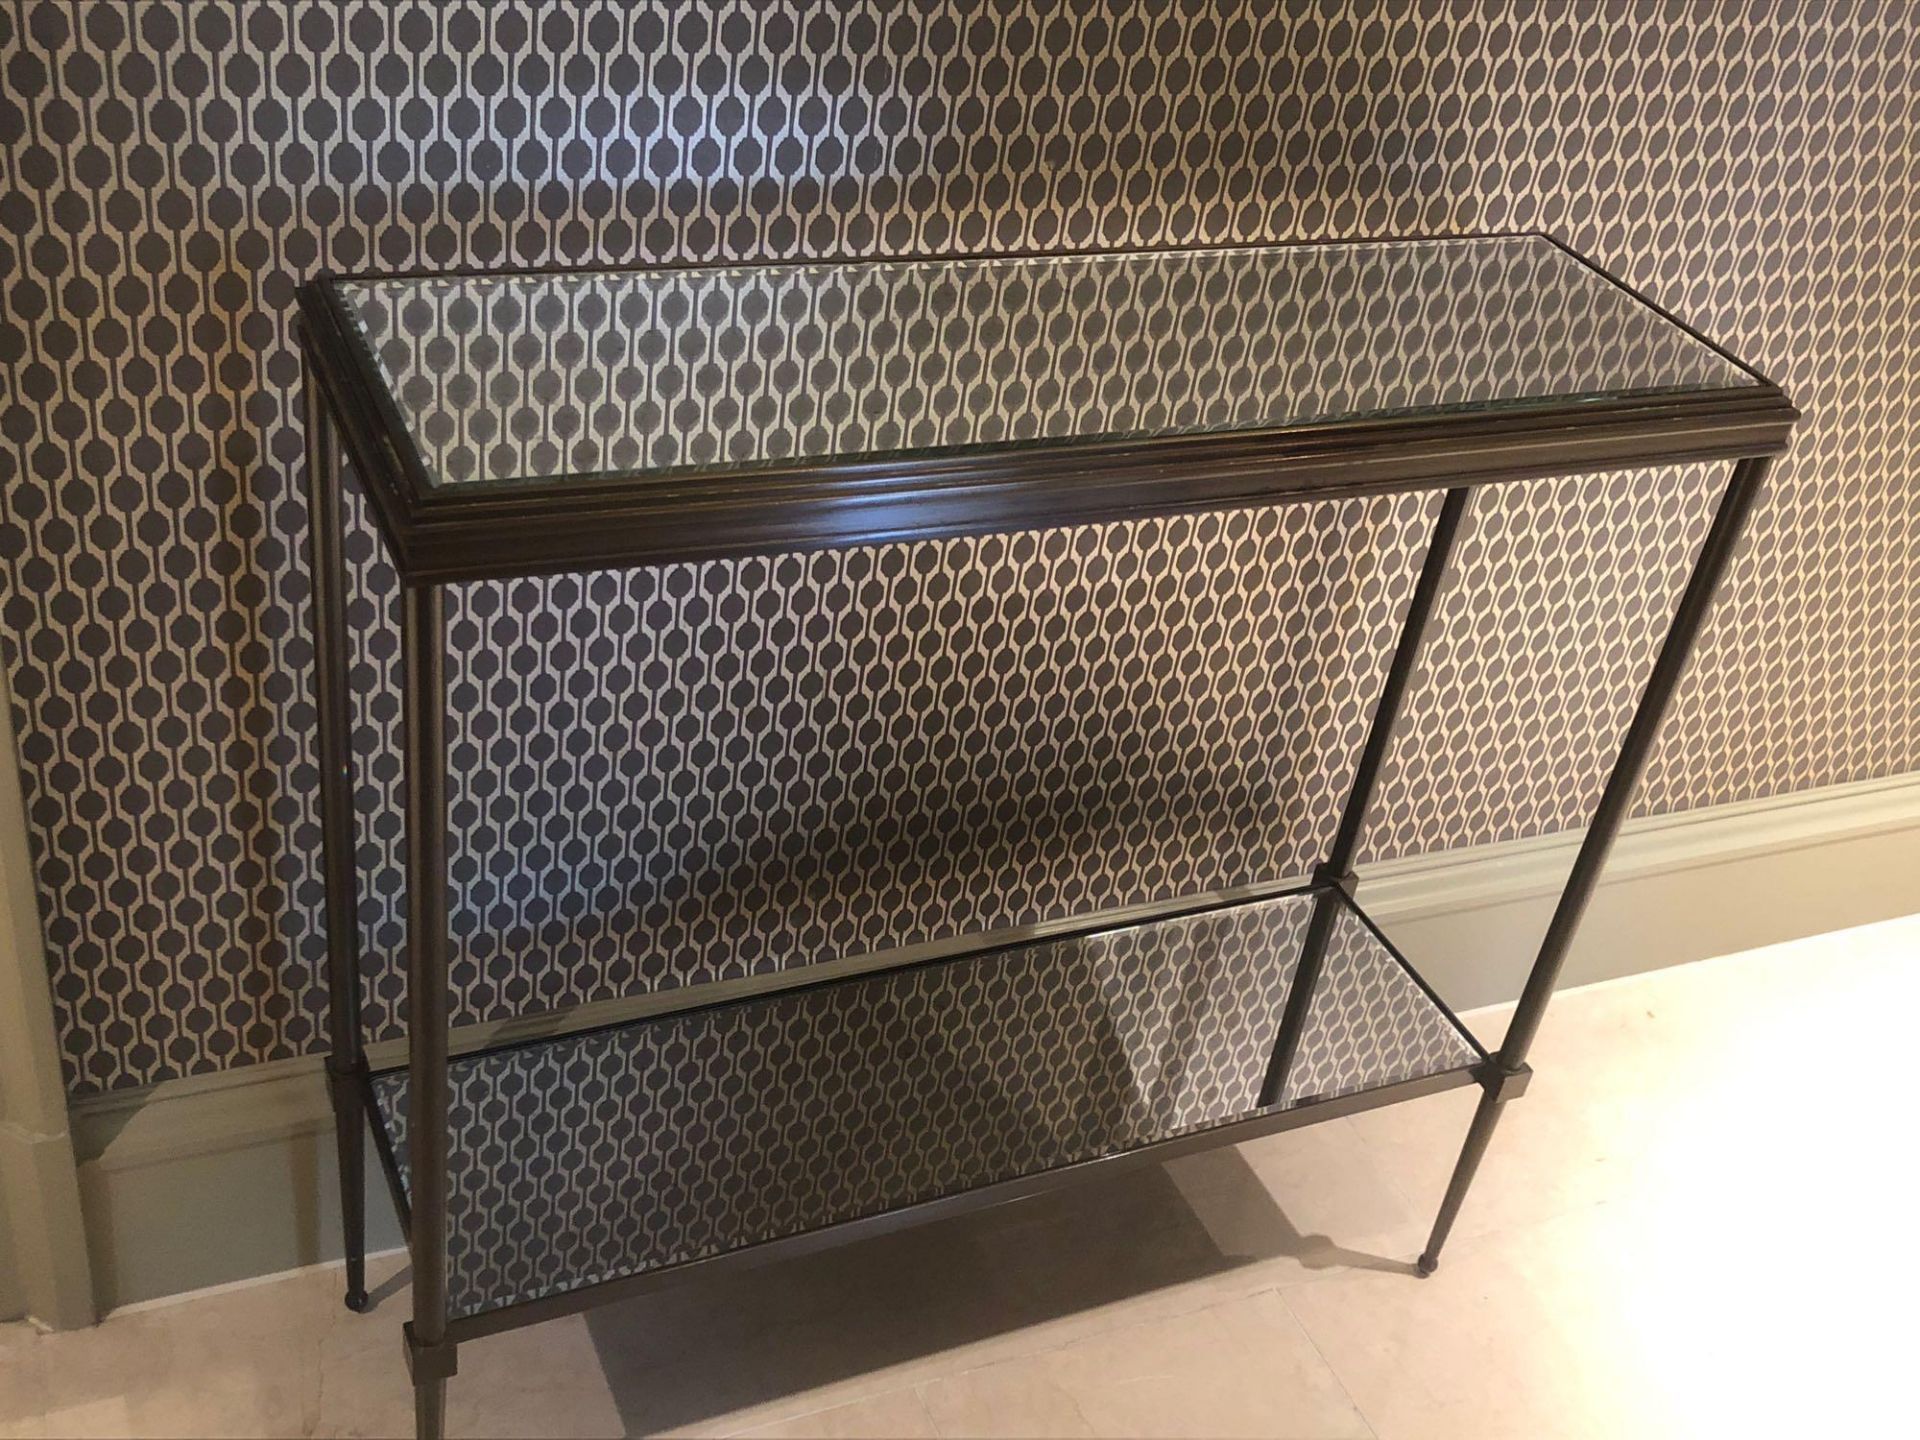 A Forged Metal Two Tier Console Table With Glass Shelves 88 x 24 x 74cm (Room 219)